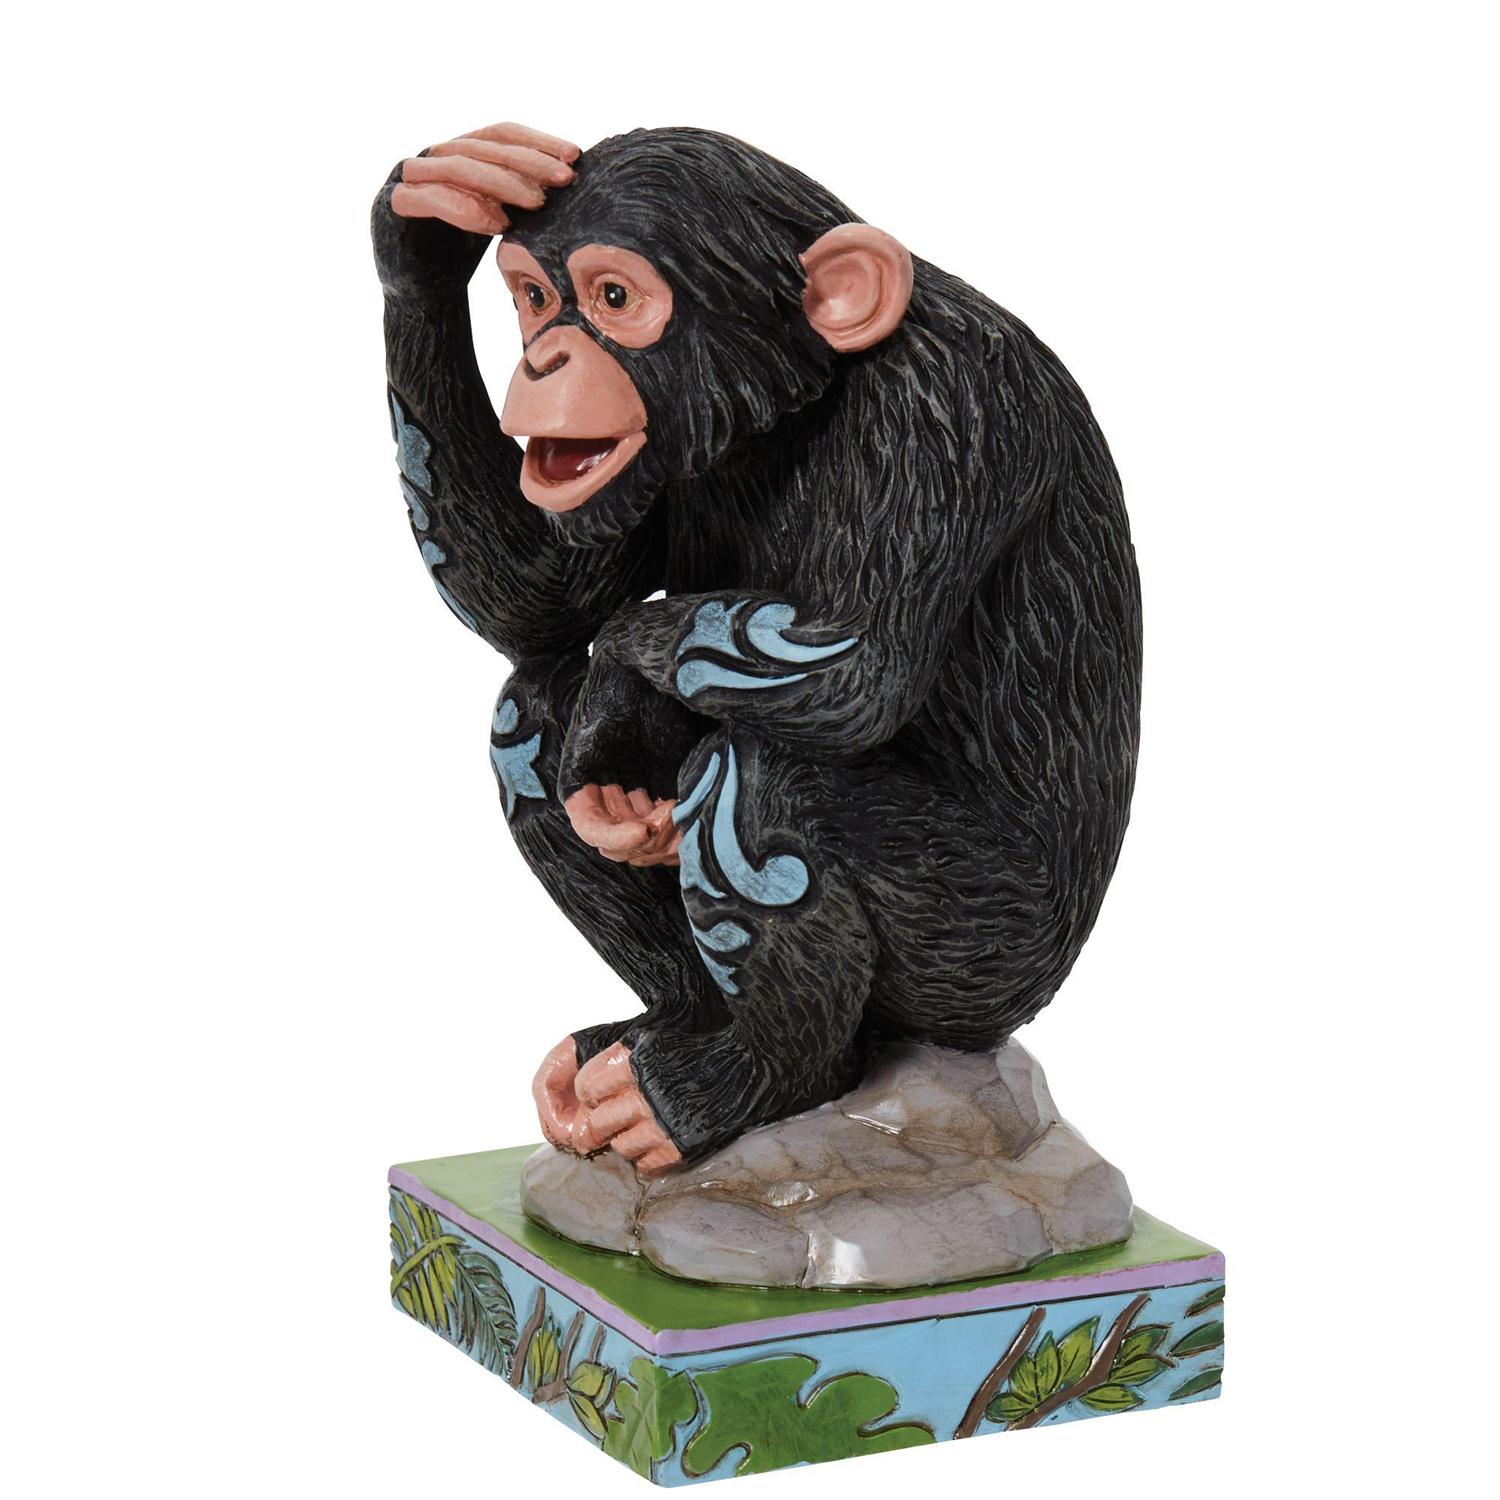 Enesco Gifts Jim Shore Animal Planet Chimpanzee Figurine Free Shipping Iveys Gifts And Decor